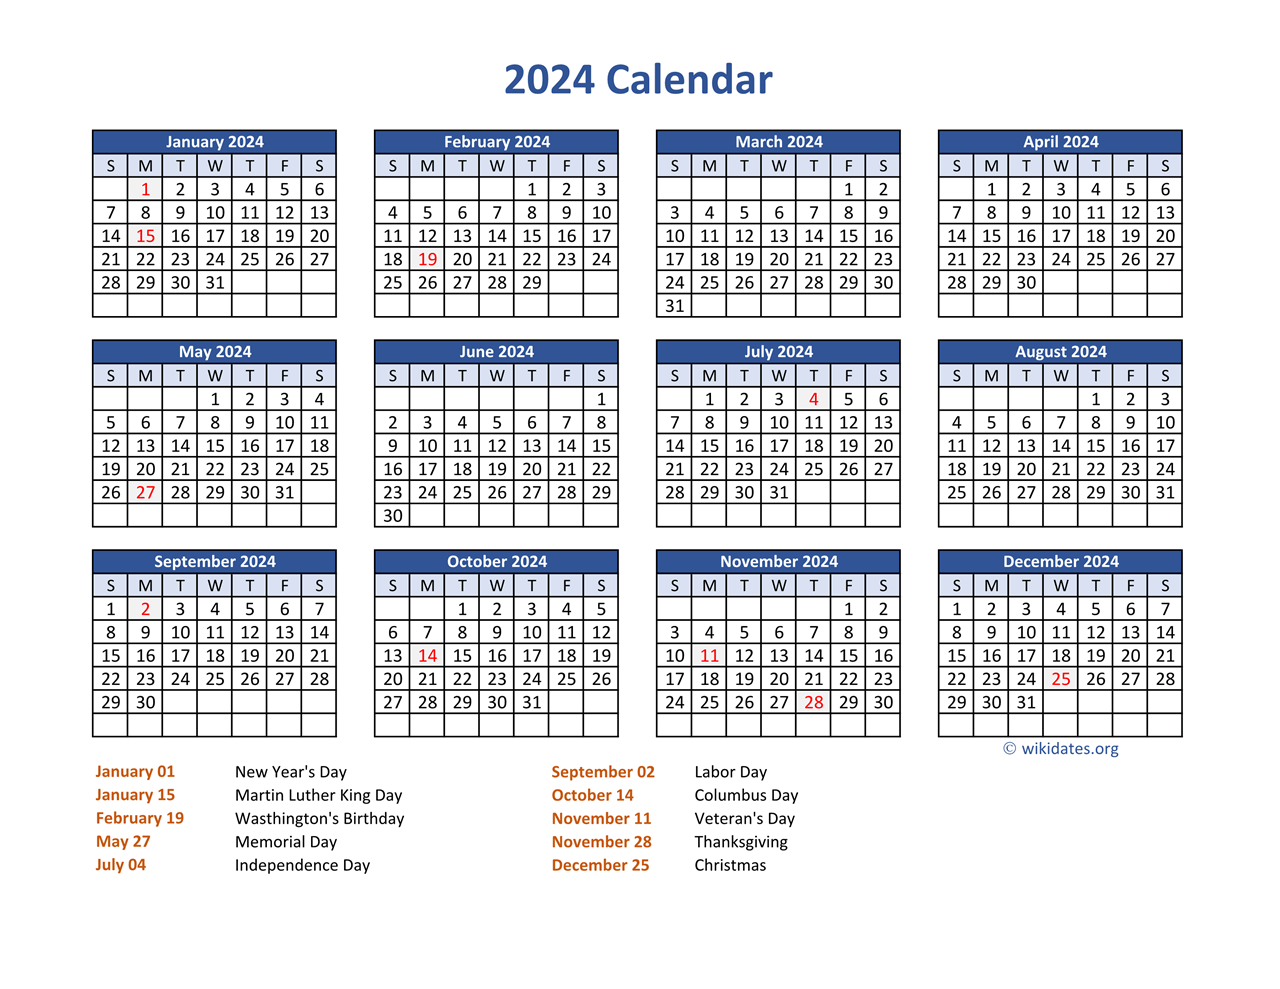 Pdf Calendar 2024 With Federal Holidays | Wikidates for 2024 Calendar Free Printable With Holidays